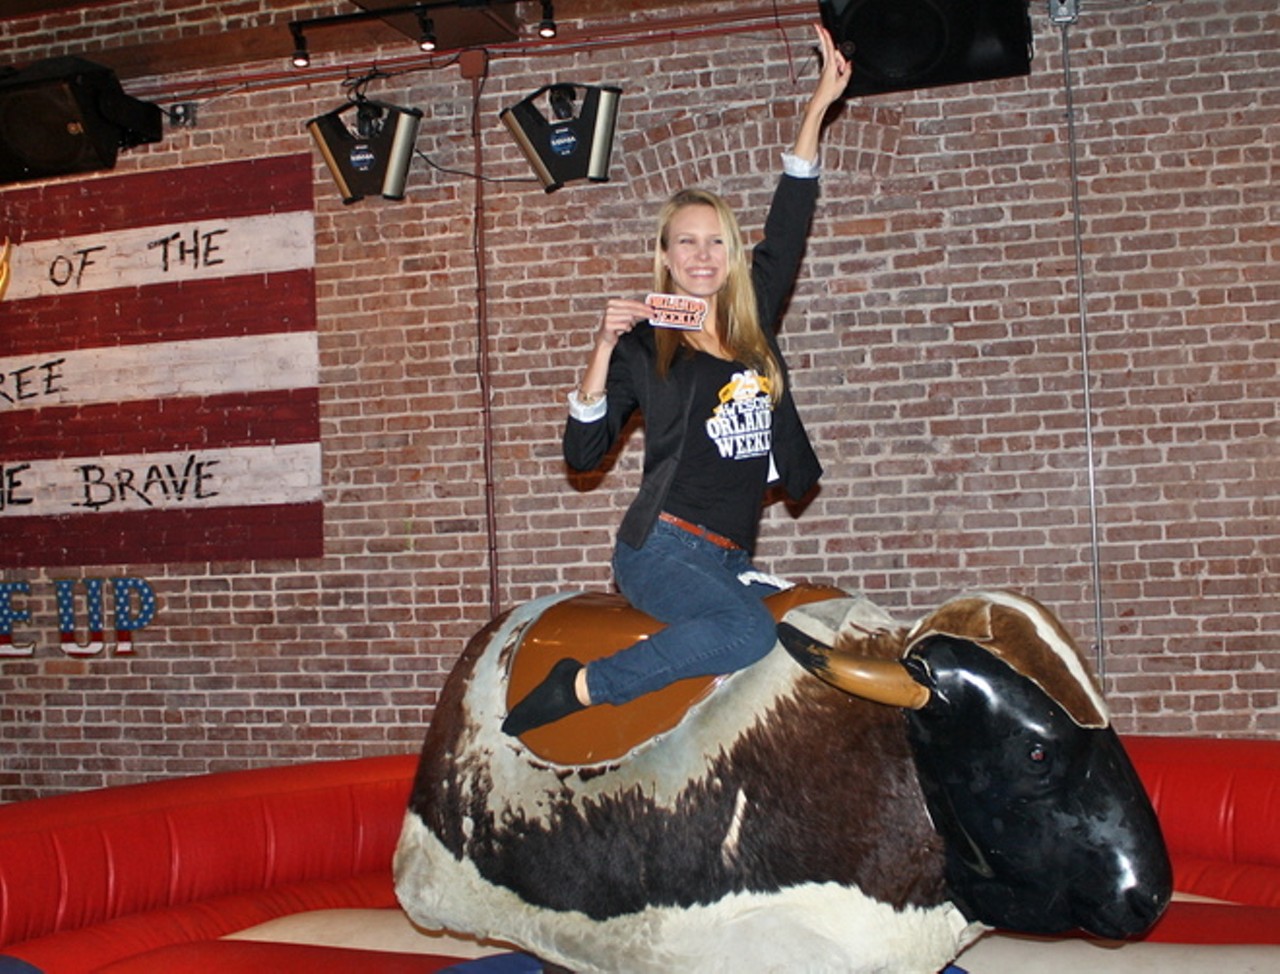 Bull Riding Action Shots from Coors Light's Most Refreshing Happy Hour at Saddle Up